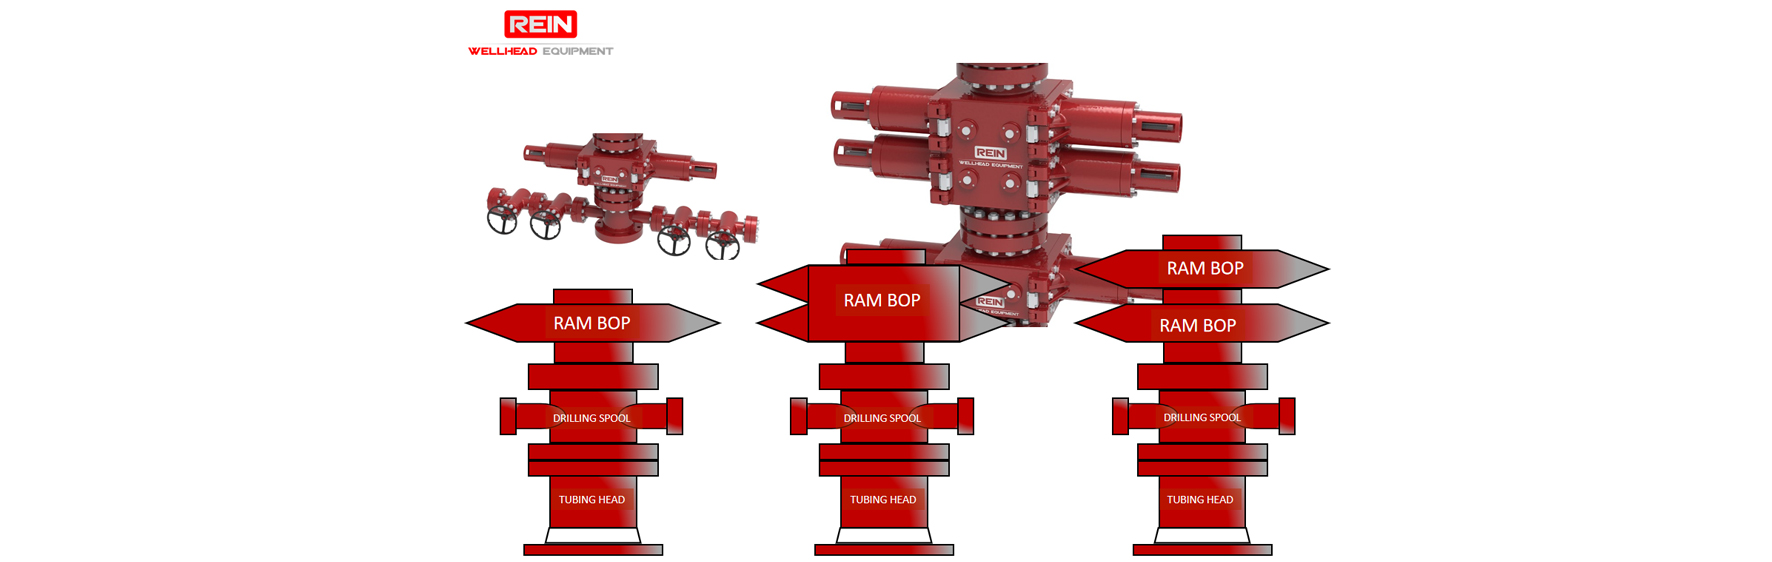 /imgs/news/Rein Wellhead Equipment provides some useful information concerning types of BOP Stacks.jpg